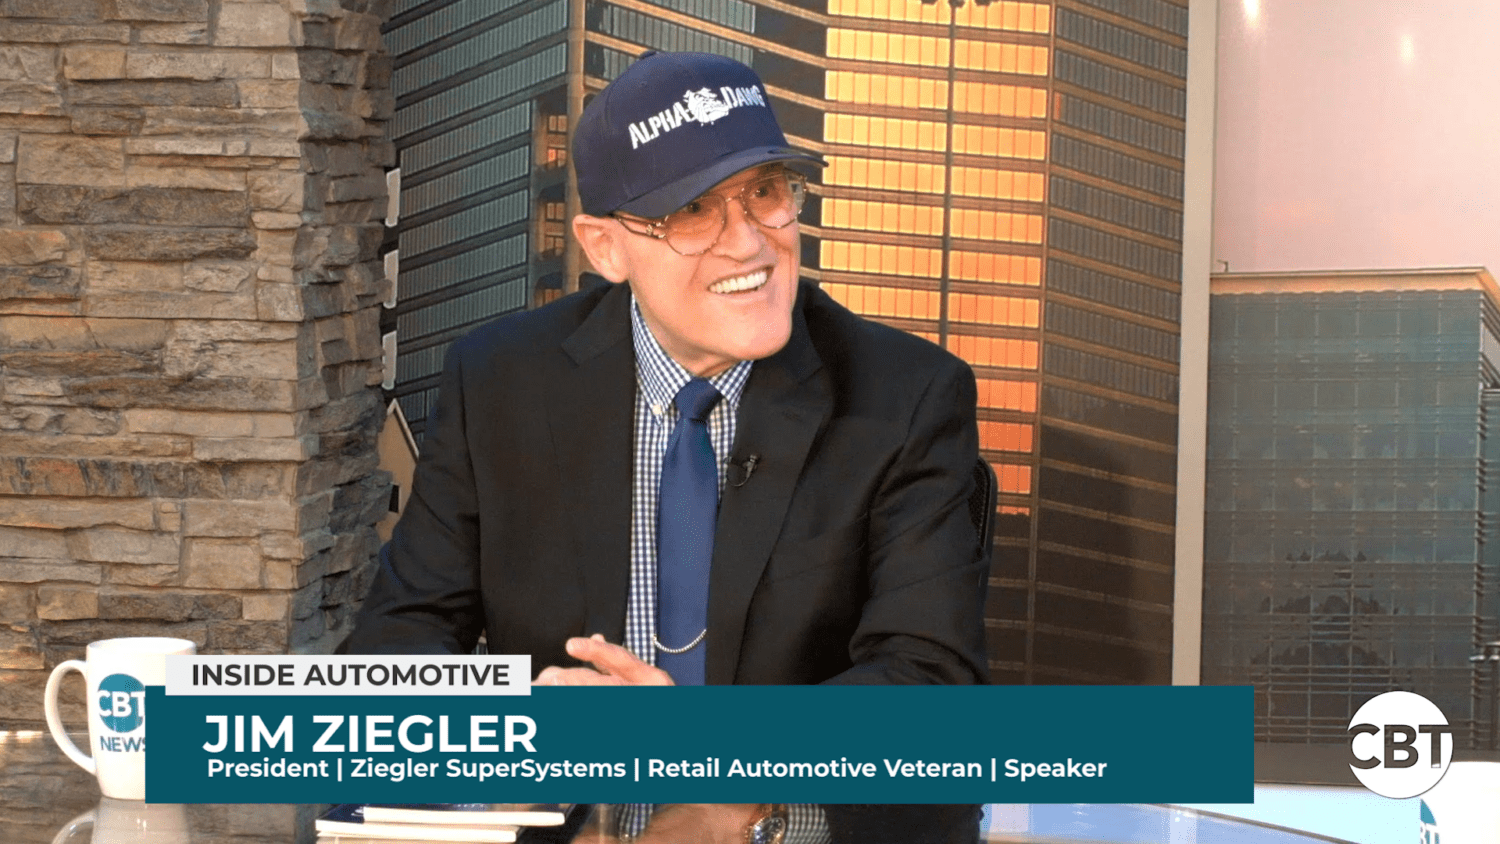 Jim Ziegler joins Inside Automotive to share his advice for improving the dealership sales process and equip managers for the new car market.